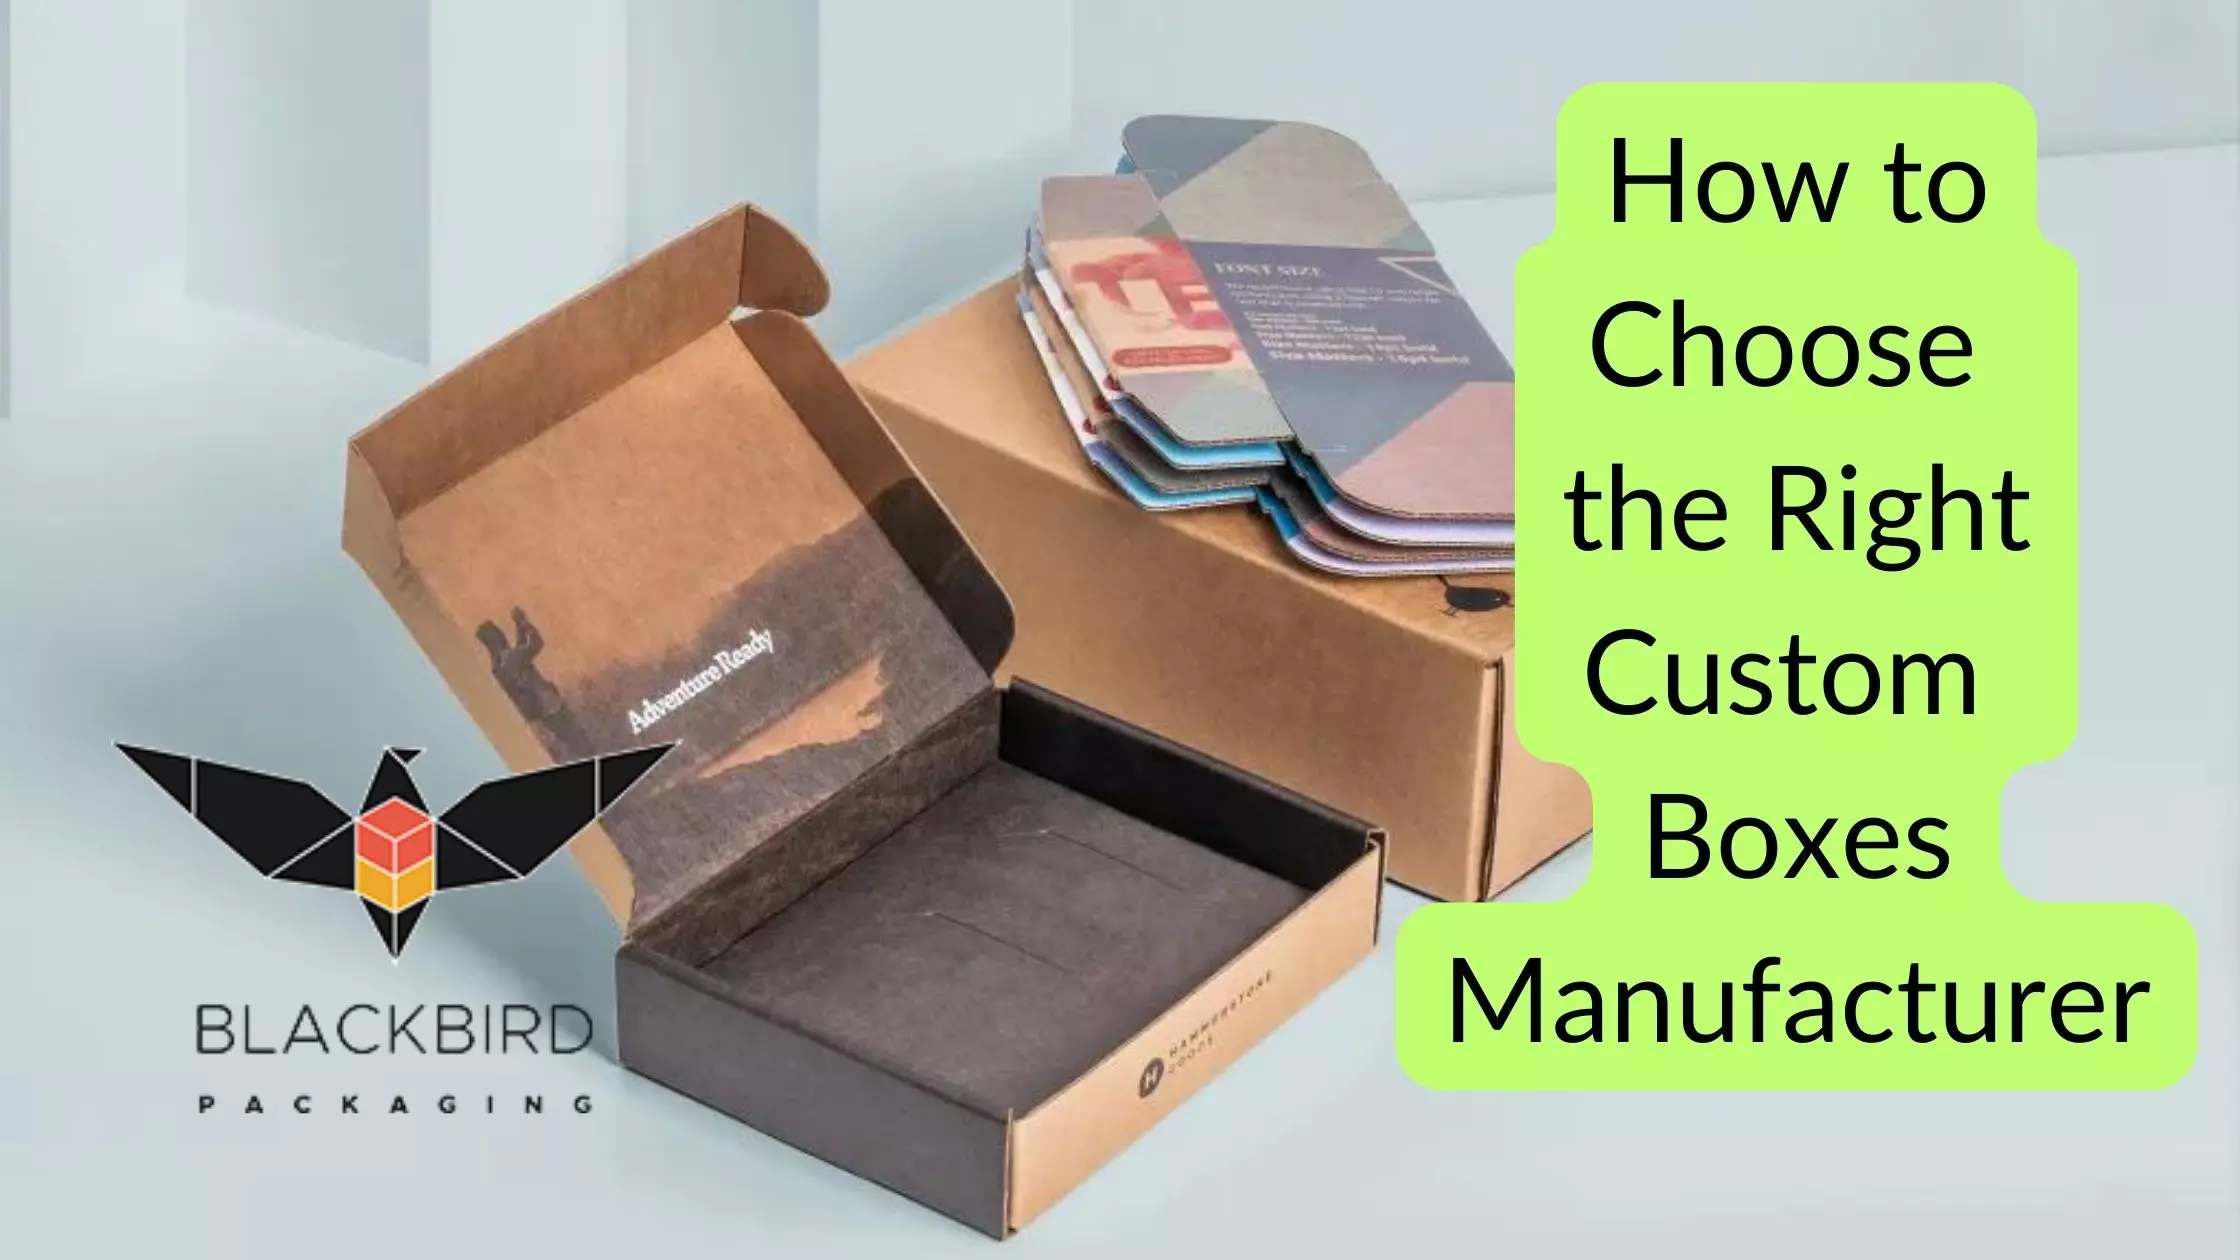 How to Choose the Right Custom Boxes Manufacturer